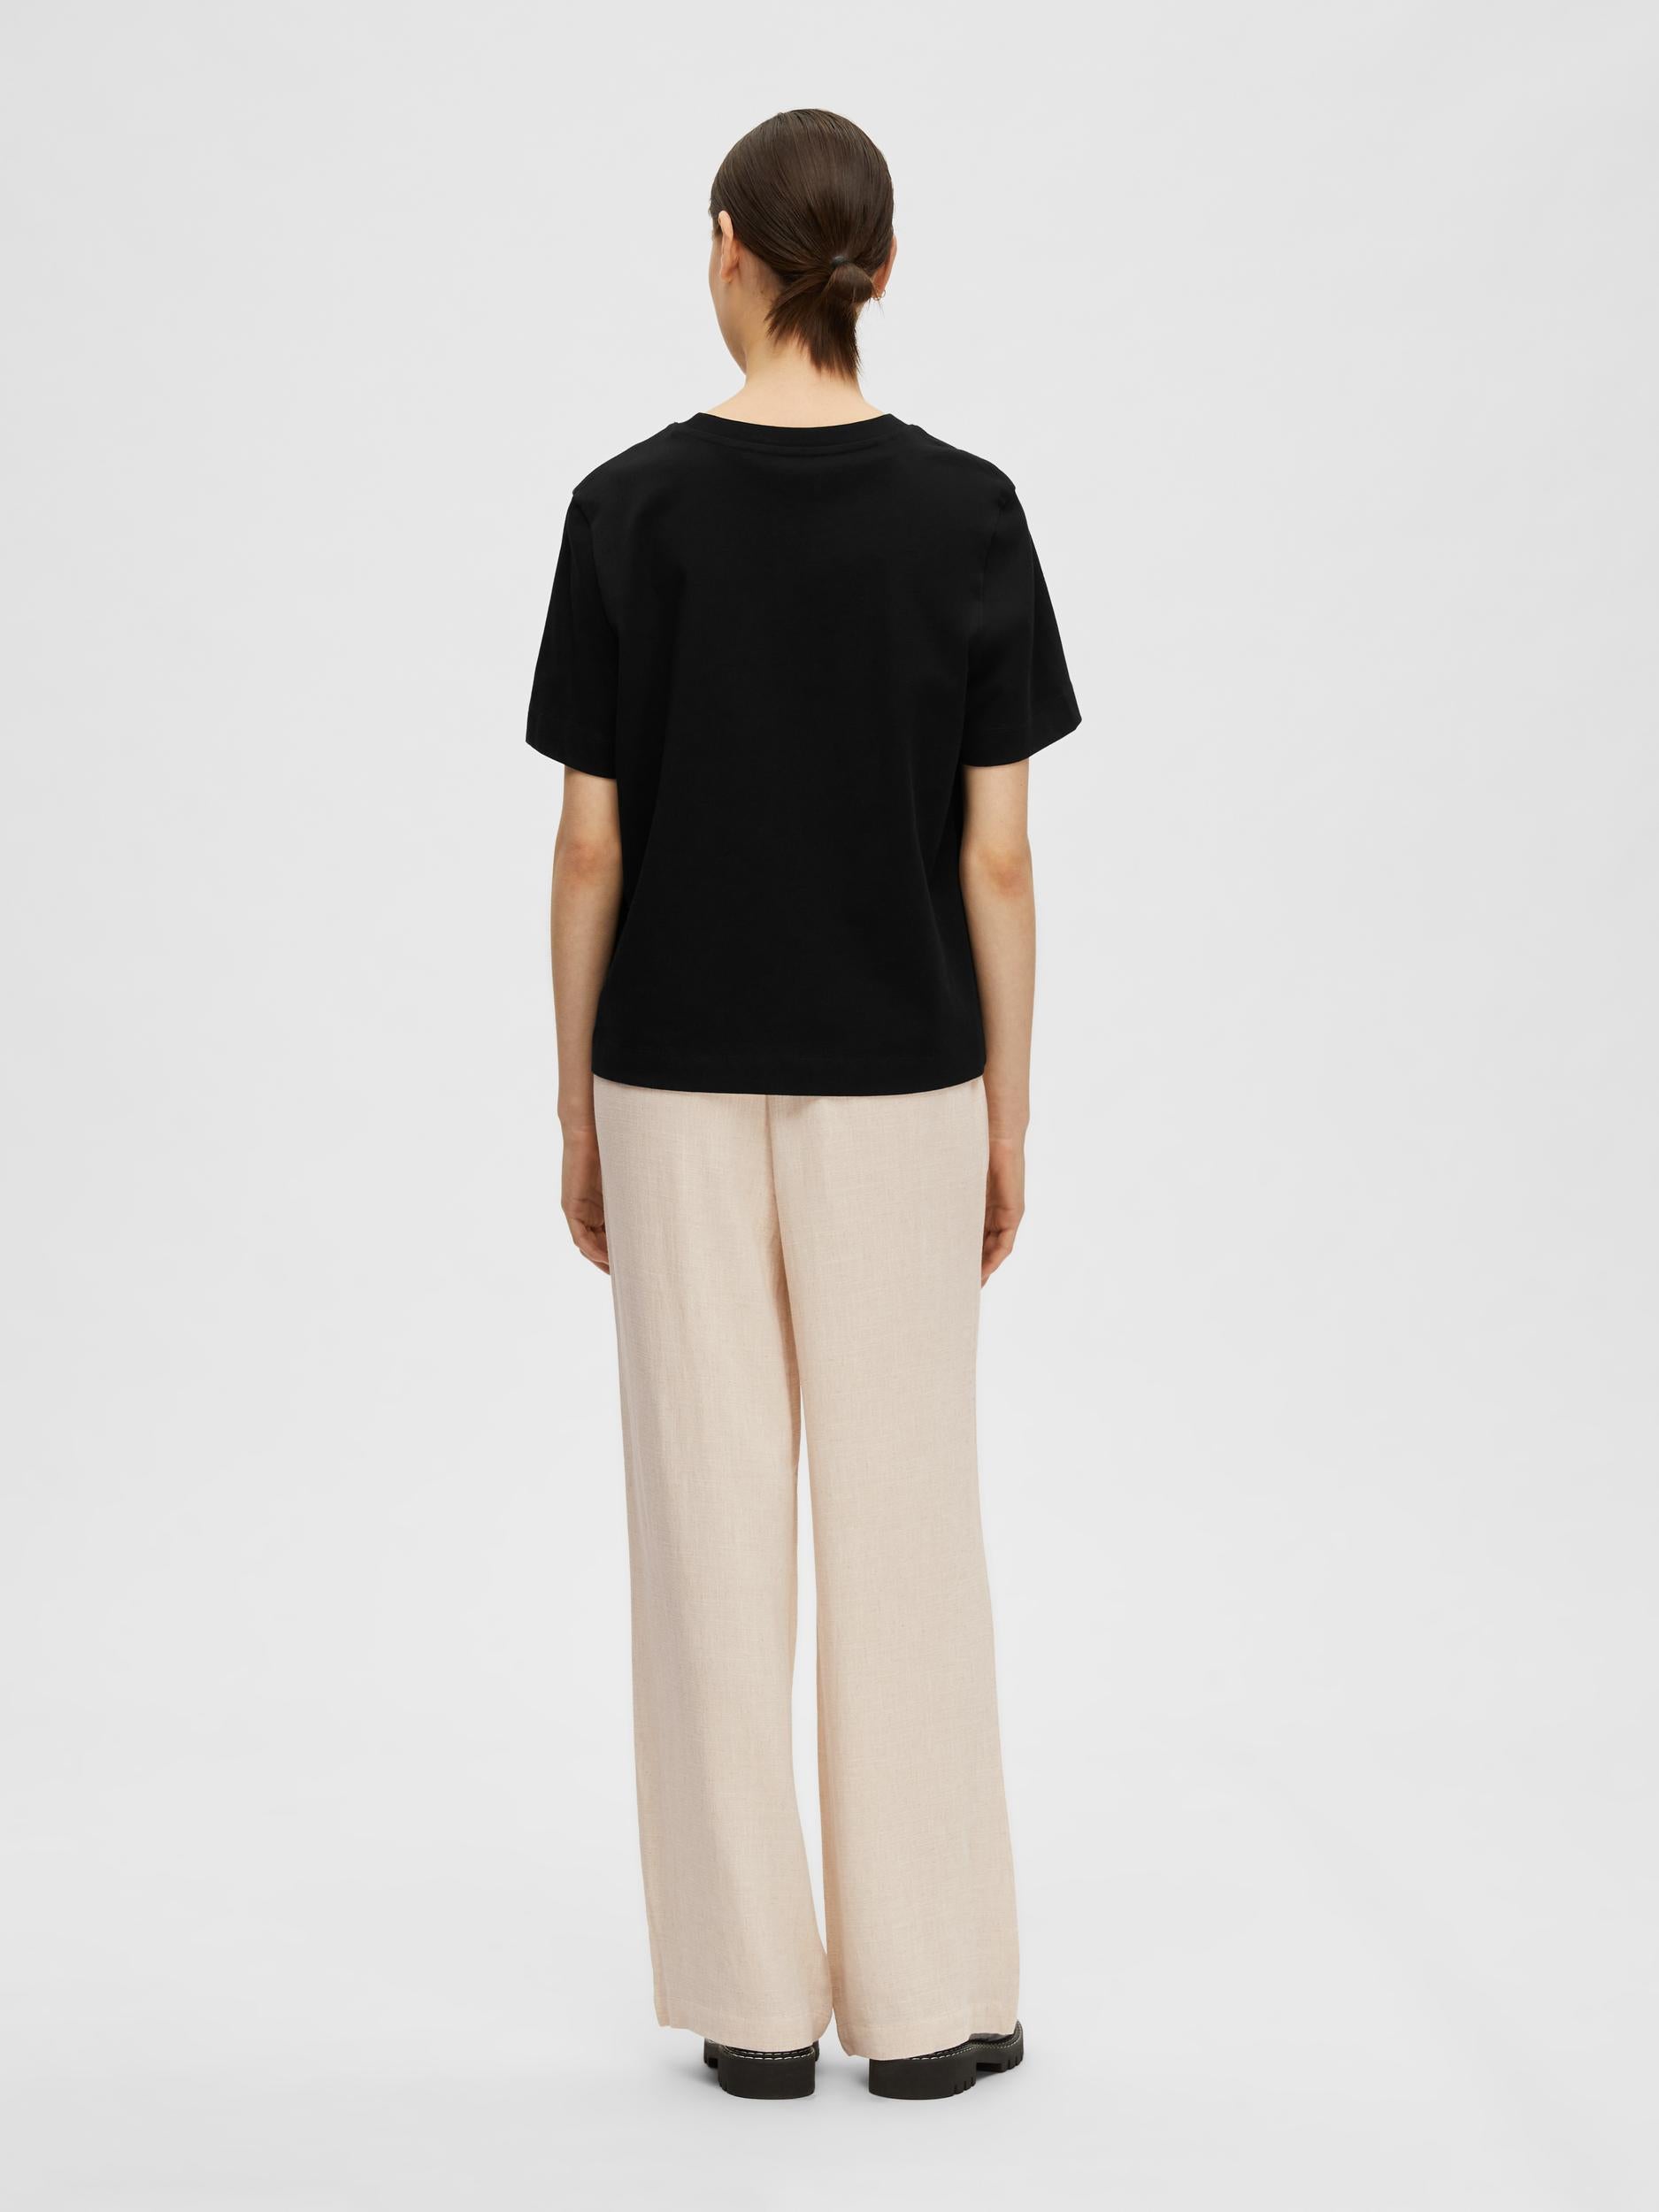 Selected Femme "Essential" Boxy Tee schwarz